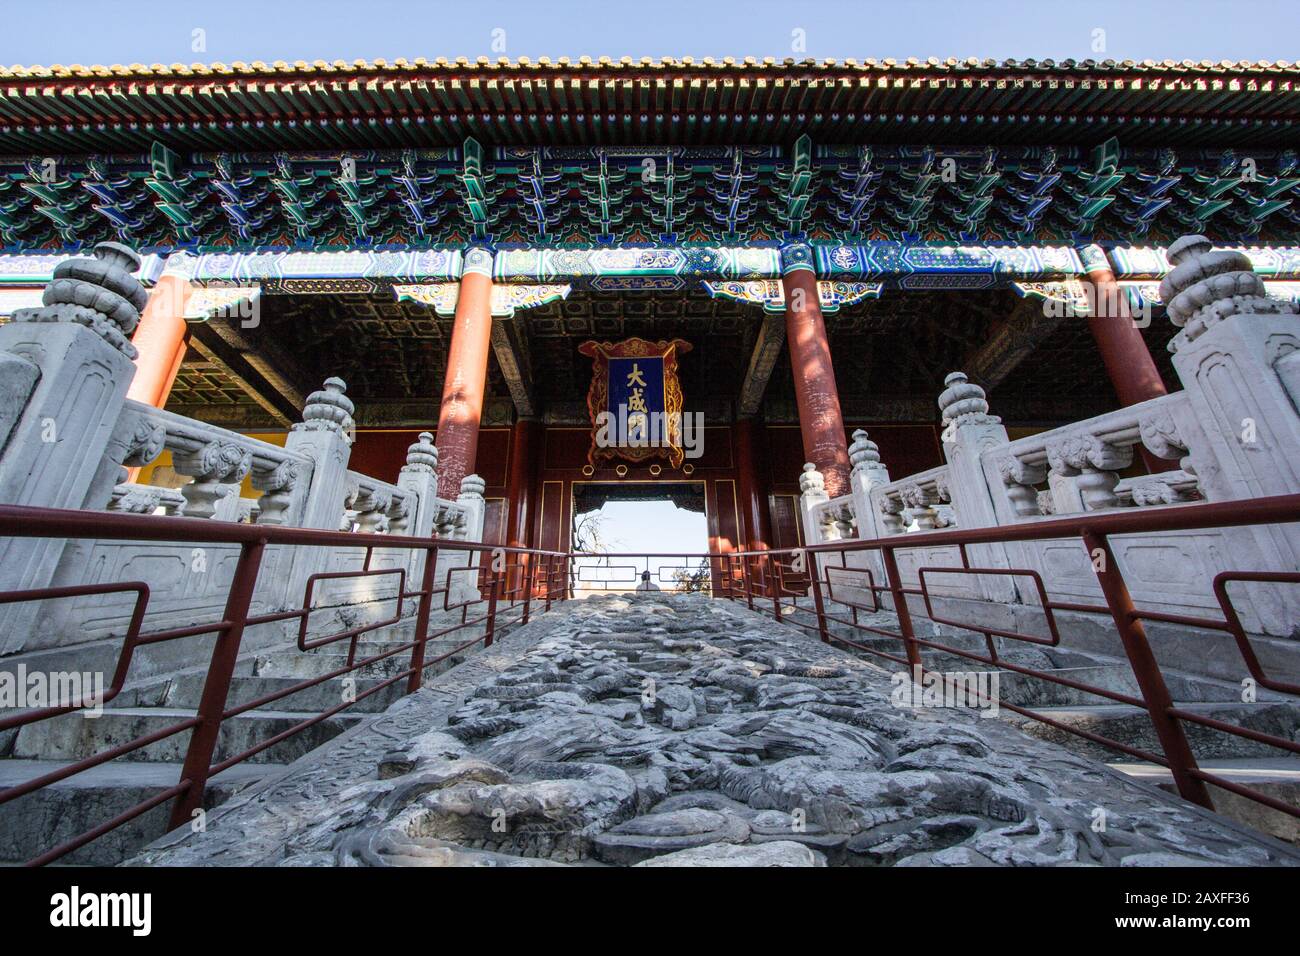 Low angle shot of the entrance of an ancient confucius temple in beijing china Stock Photo